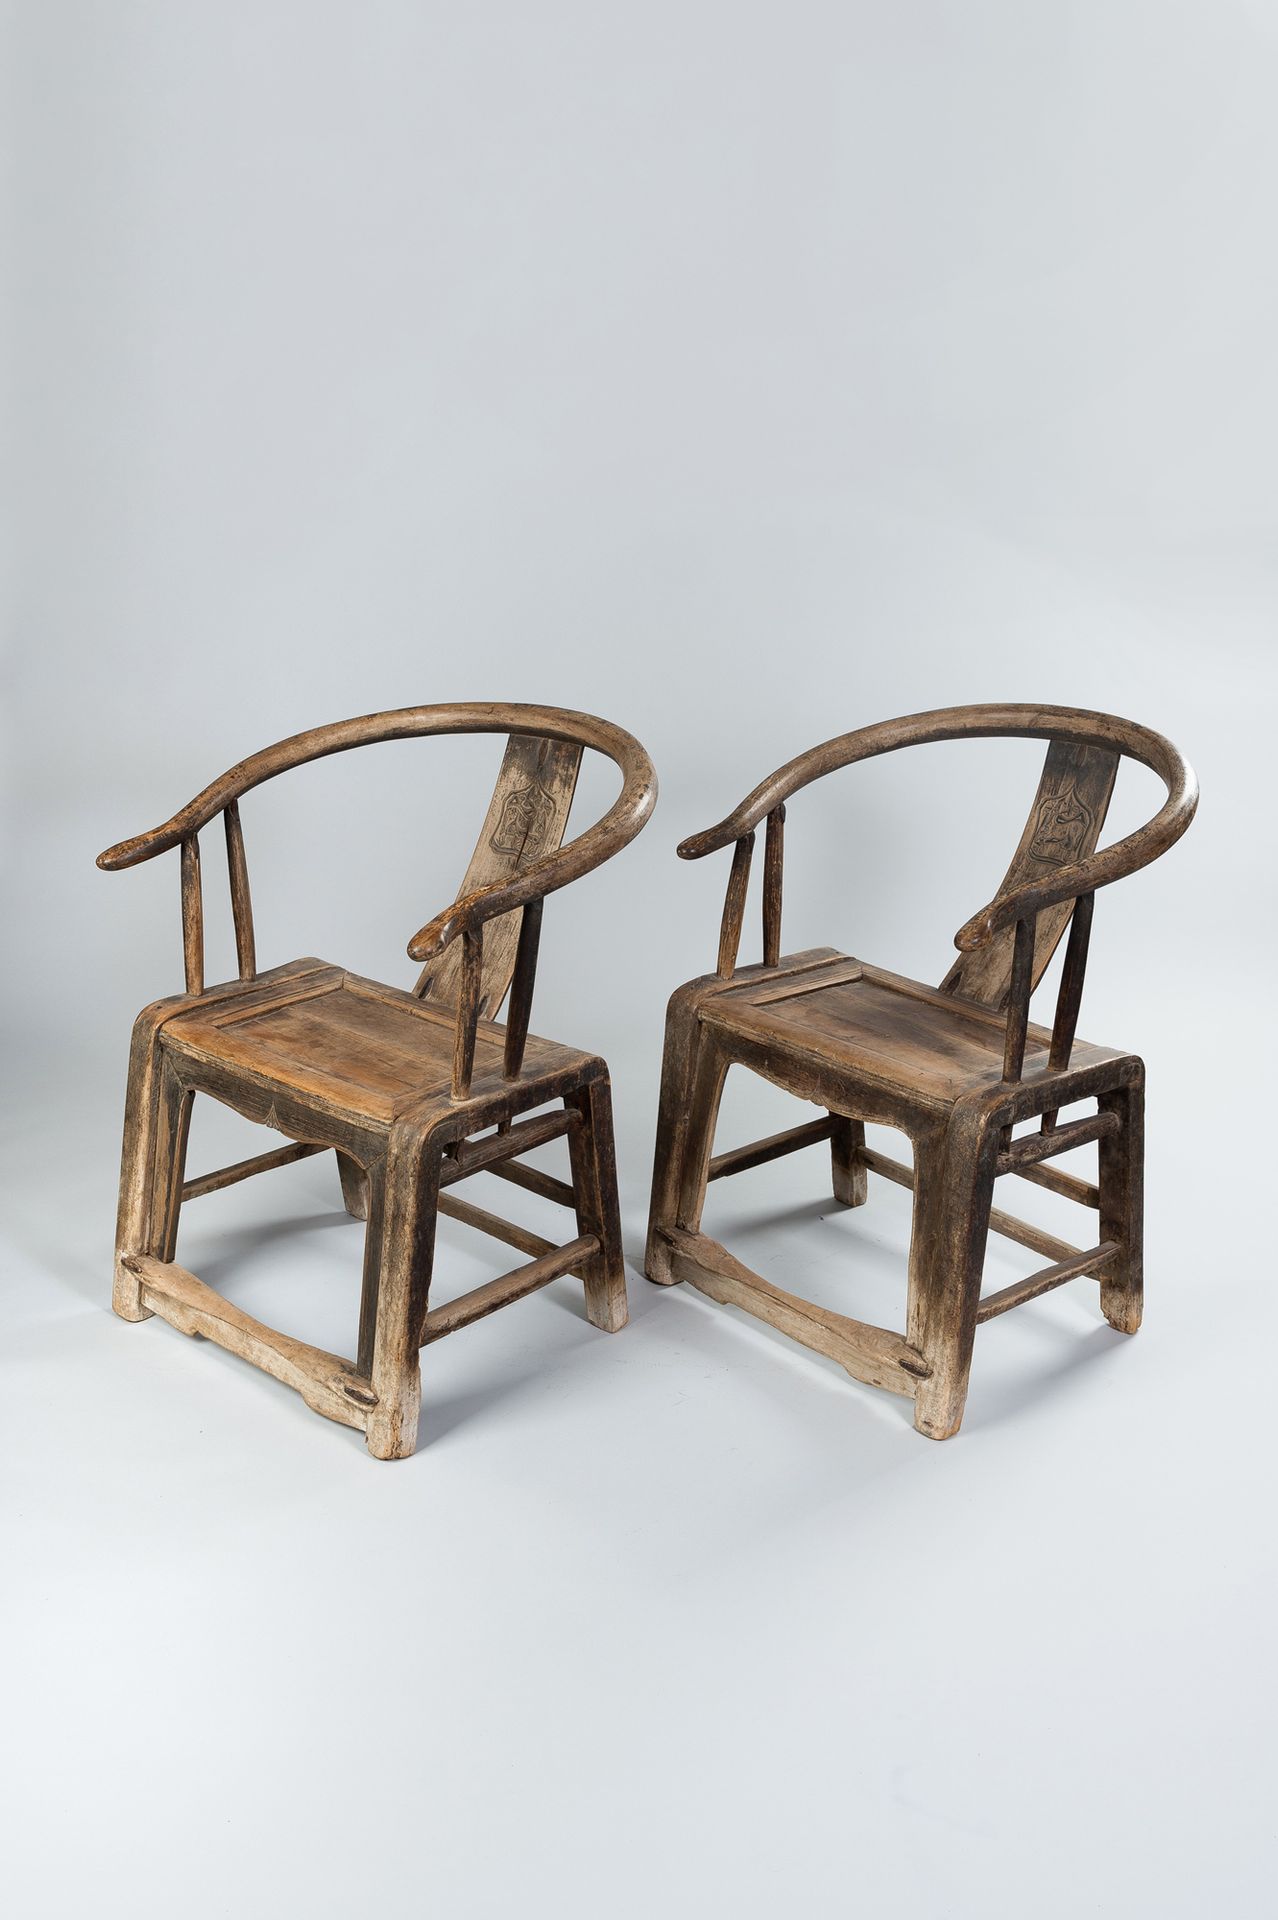 A PAIR OF HORSESHOE WOOD CHAIRS A PAIR OF HORSESHOE WOOD CHAIRS
China, Qing Dyna&hellip;